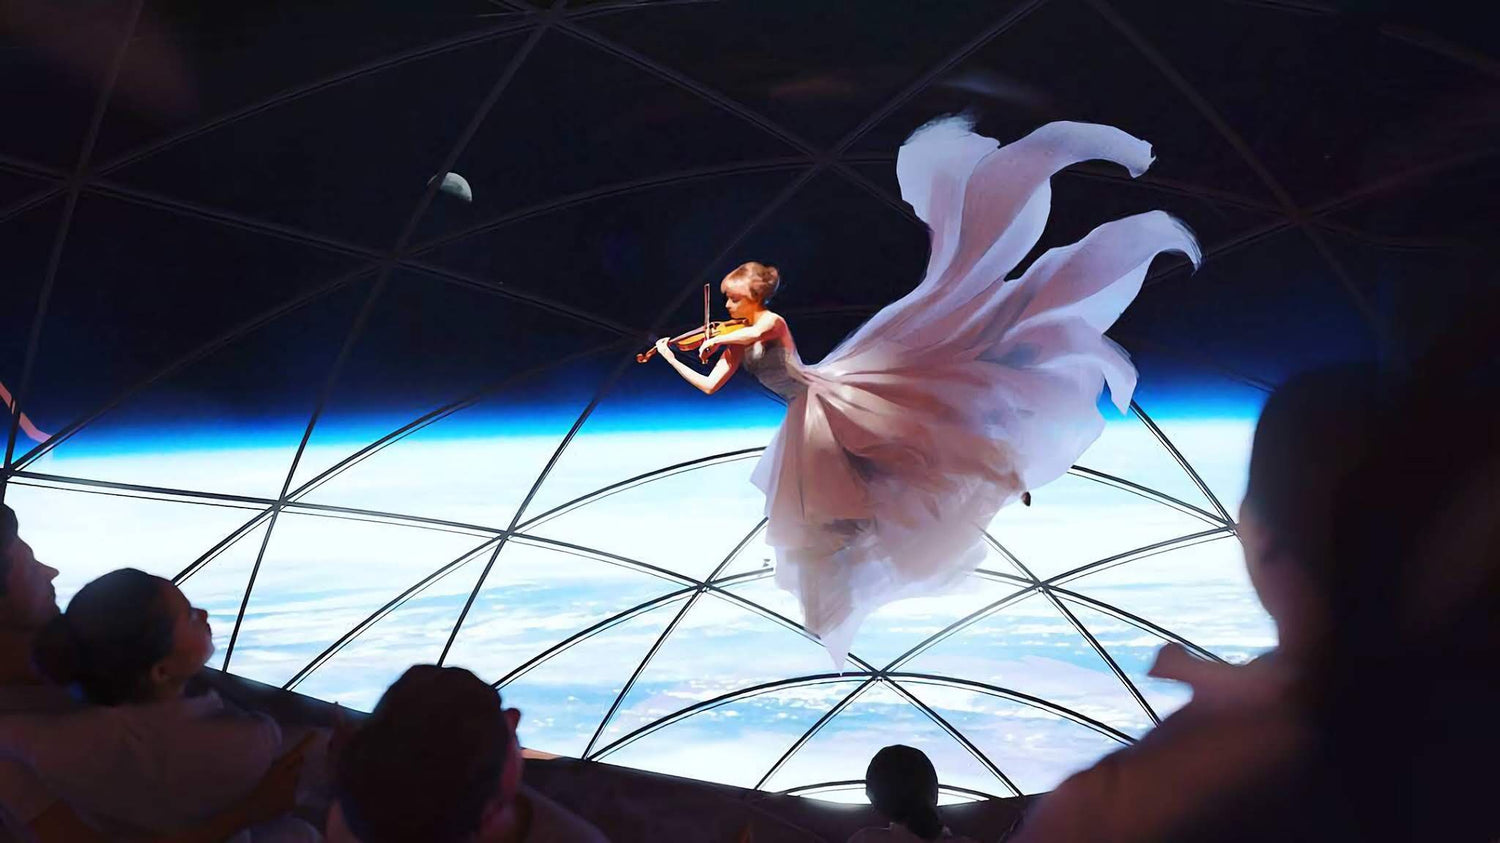 SpaceX founder Elon Musk dreams of musicians playing in zero gravity aboard Starship